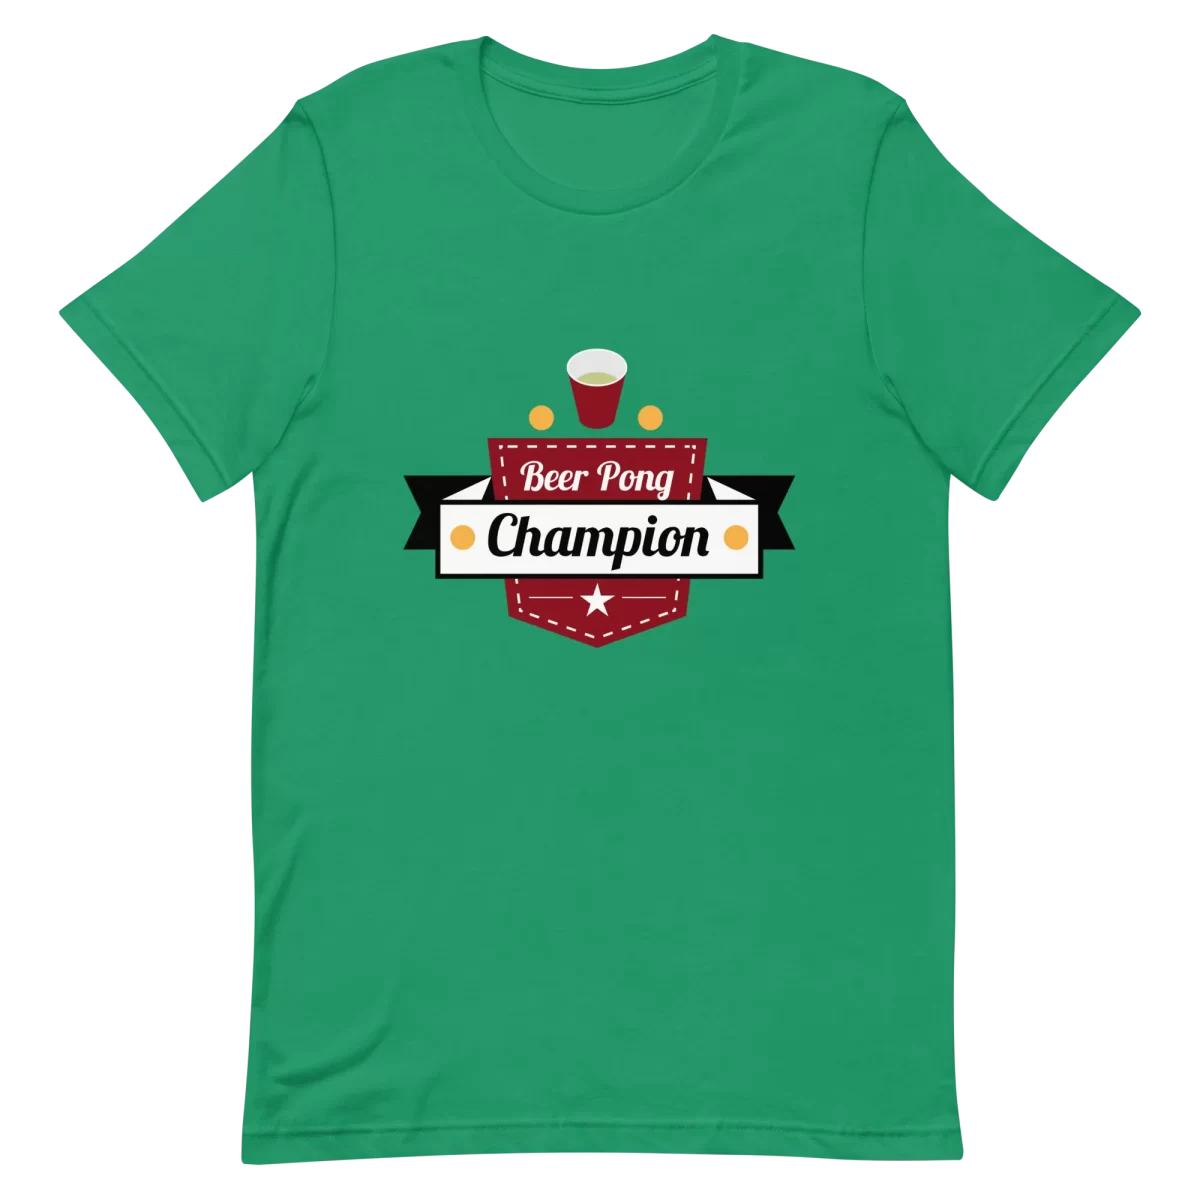 Unisex T-Shirt - Beer Pong Champion - Kelly